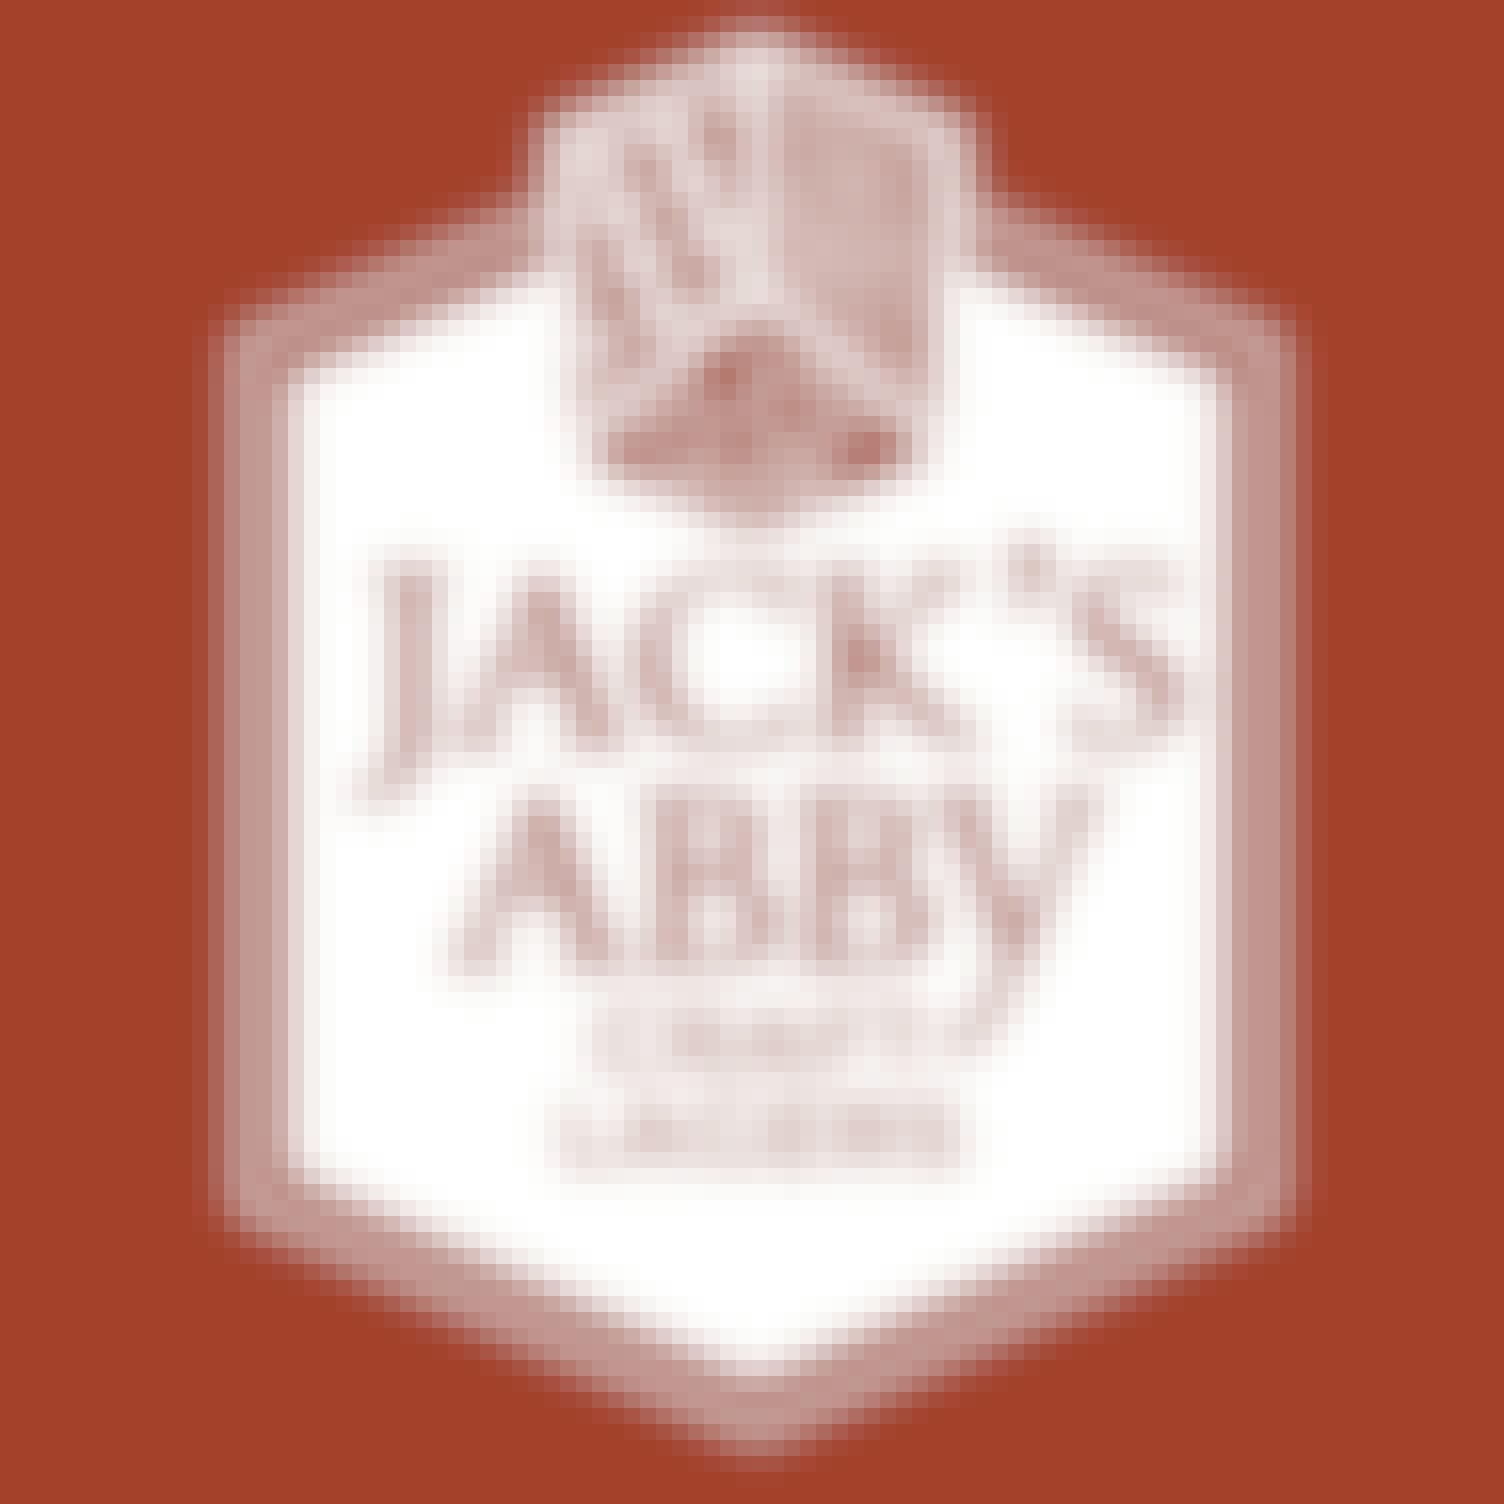 Jack's Abby Fest With The Best Variety Pack 12 pack 12 oz. Can